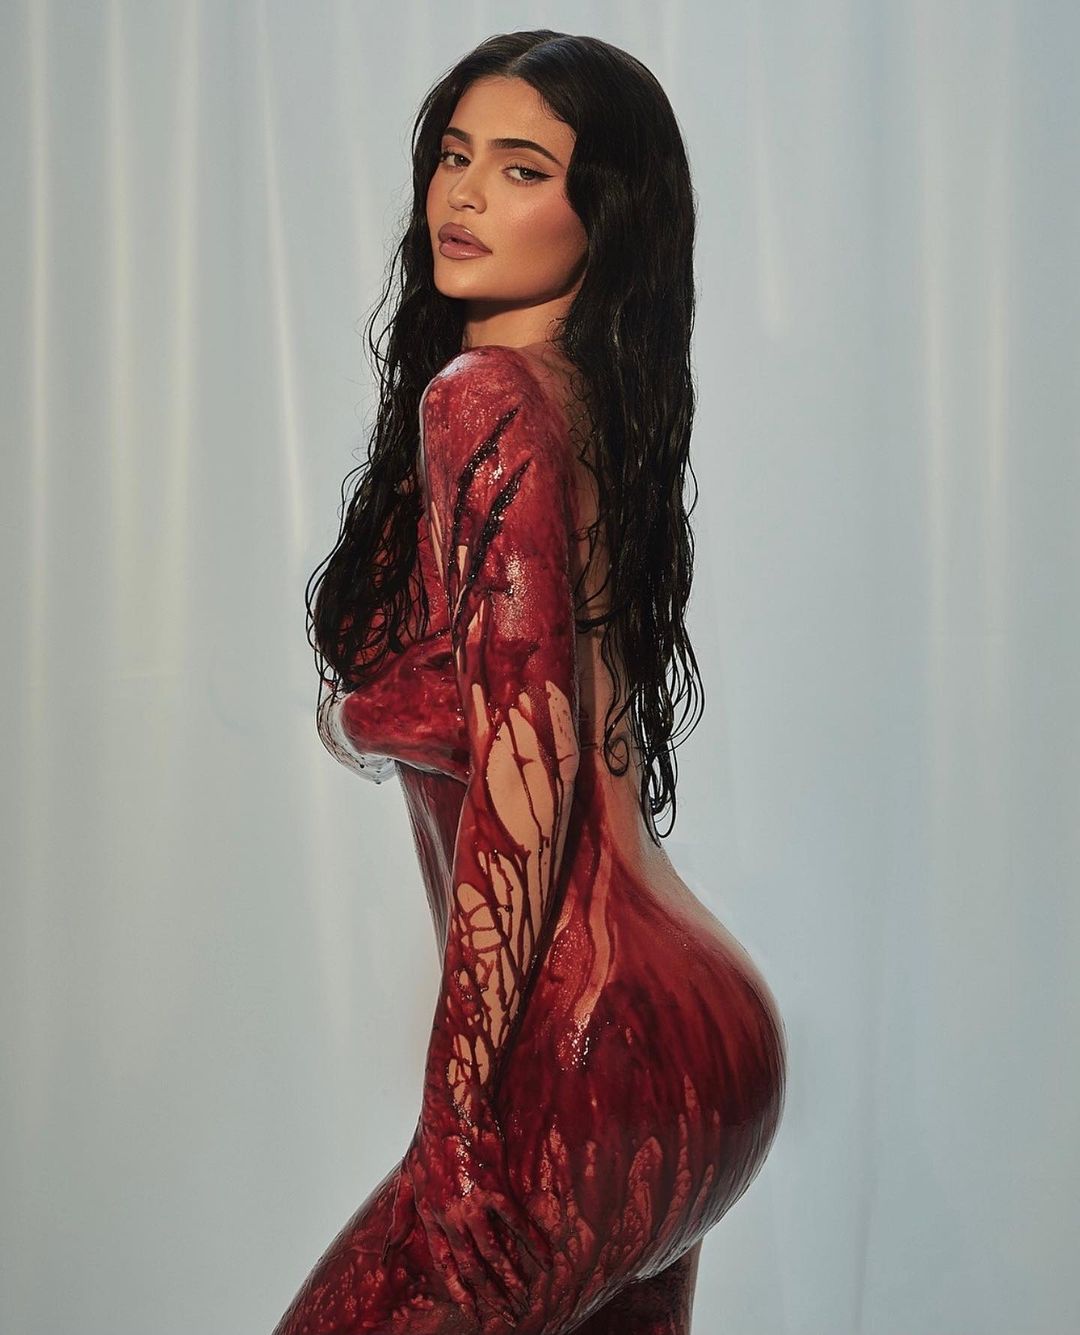 Kylie Jenner is Making Everyone Uncomfortable! - Photo 2